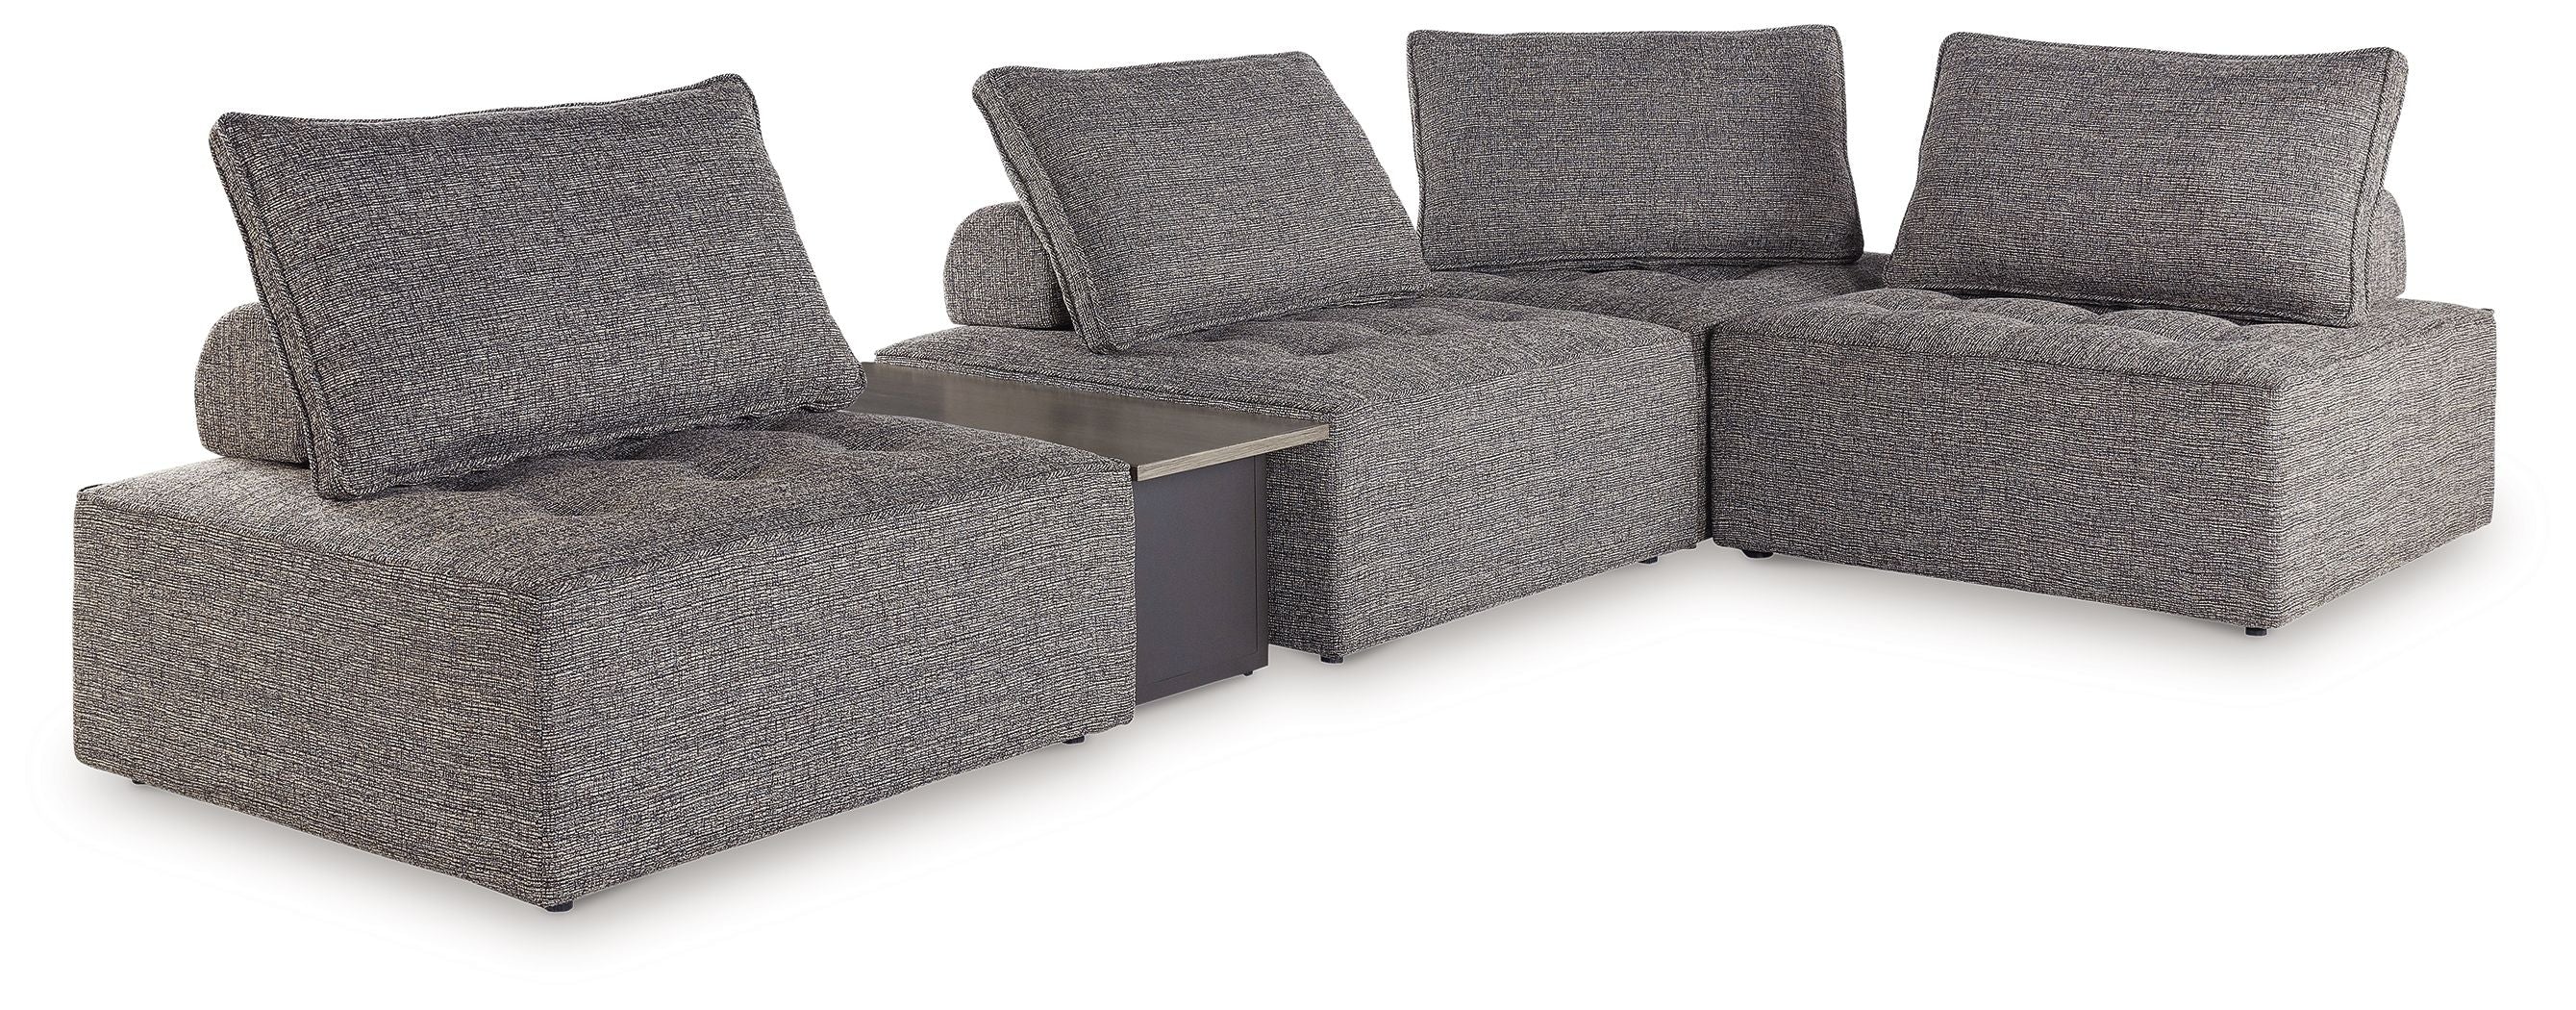 Bree Zee - Outdoor Sectional-Stationary Sectionals-American Furniture Outlet